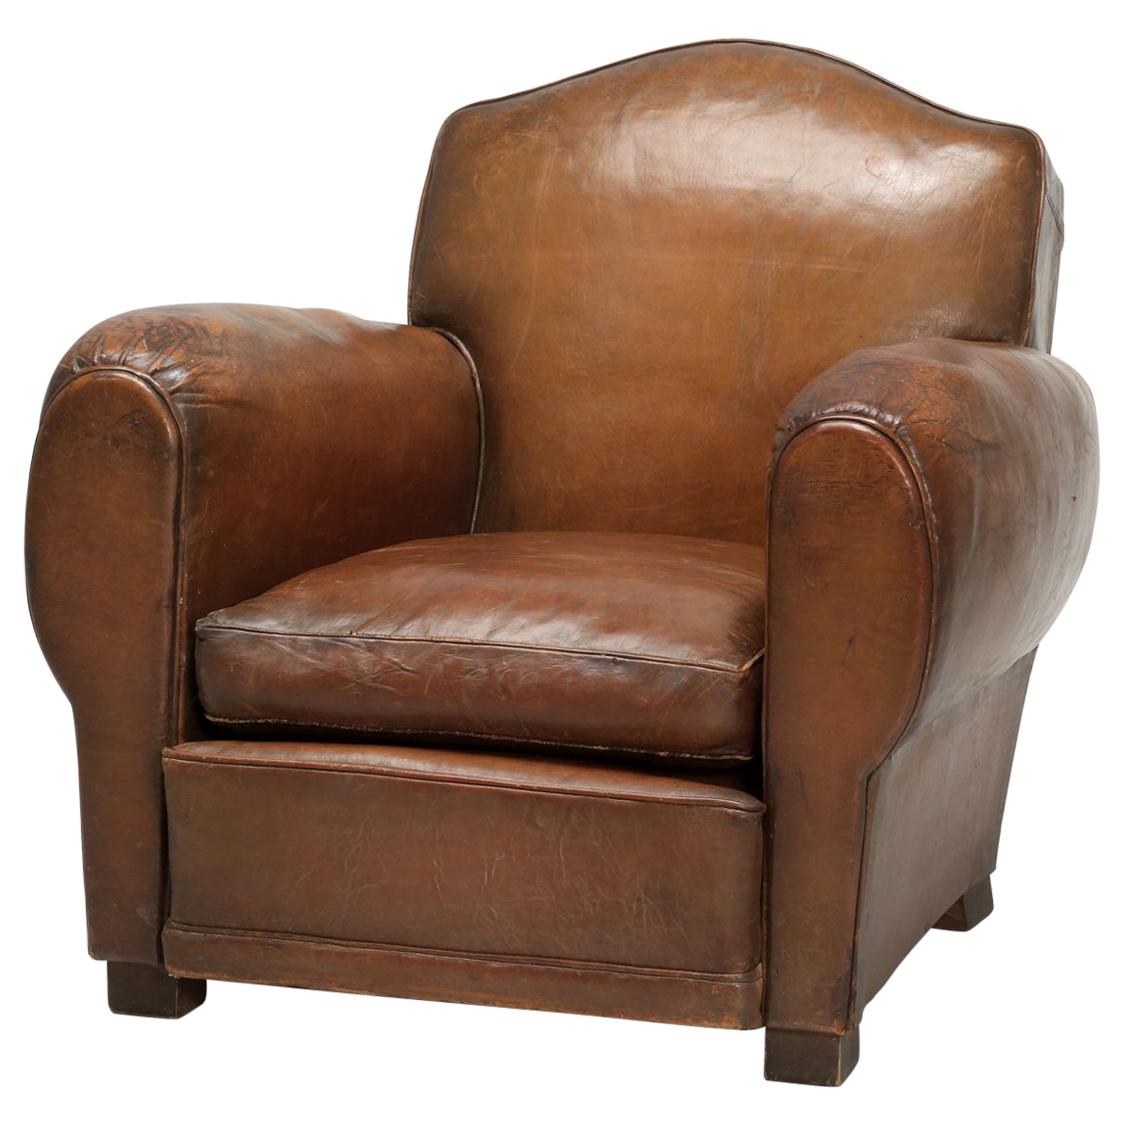 French Leather Club Chair from the Art Deco Period, Internally Restored Properly